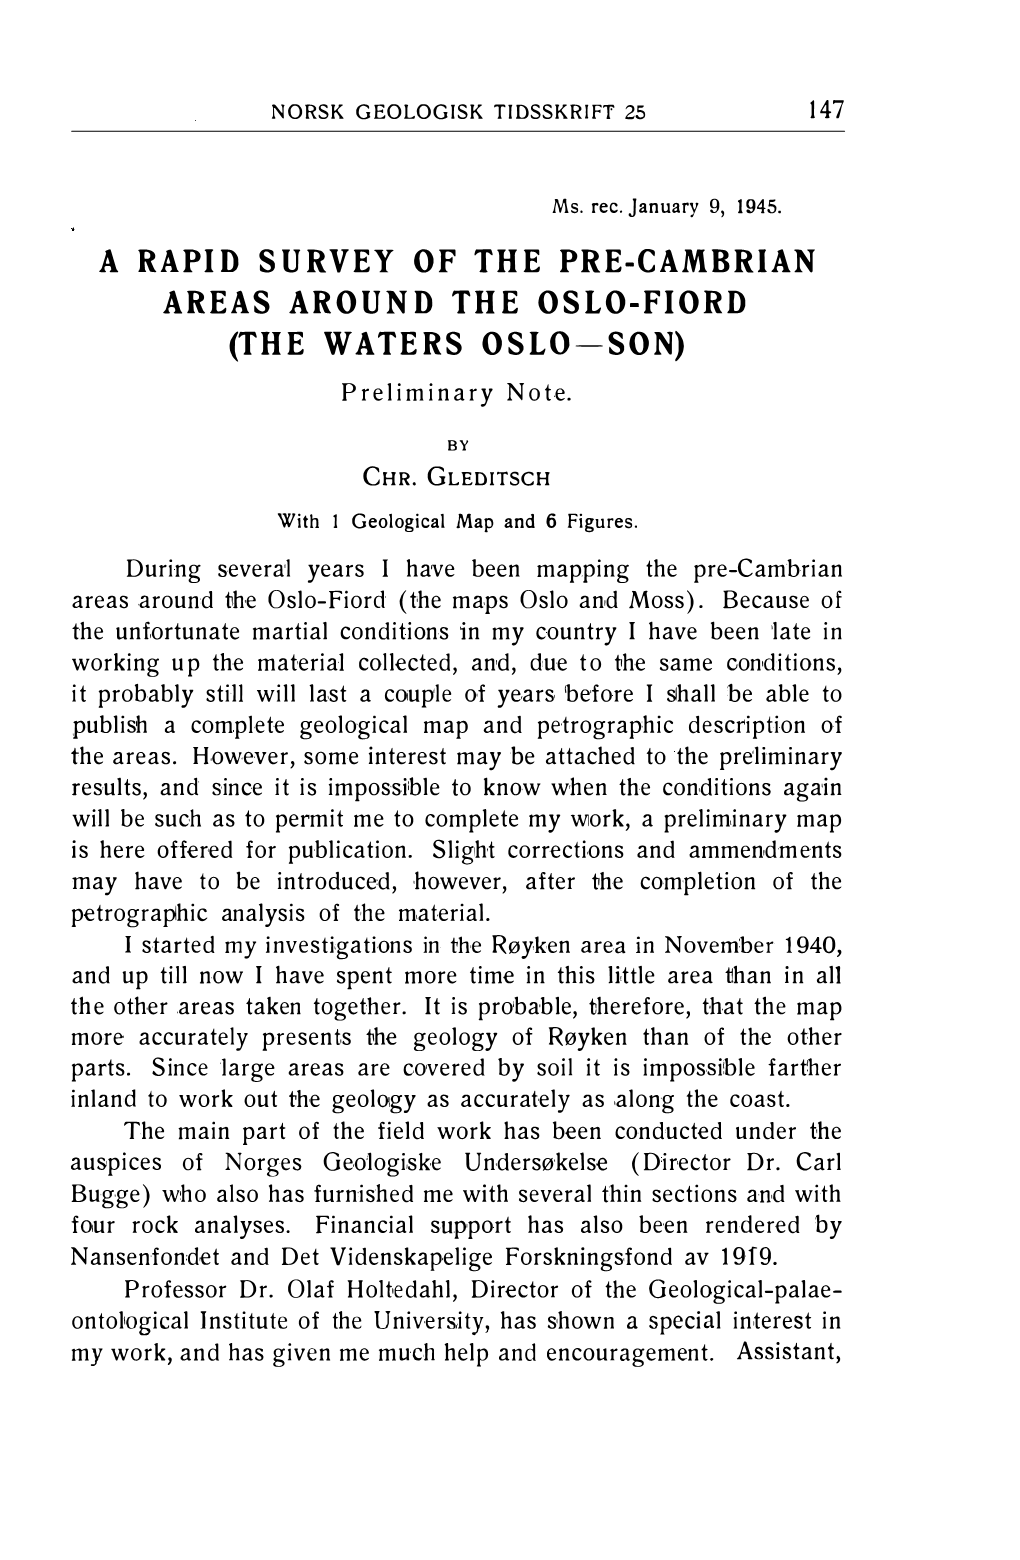 A Rapid Survey of the Pre-Cambrian Areas Around the Oslo-Fiord (The Waters Oslo-Son)